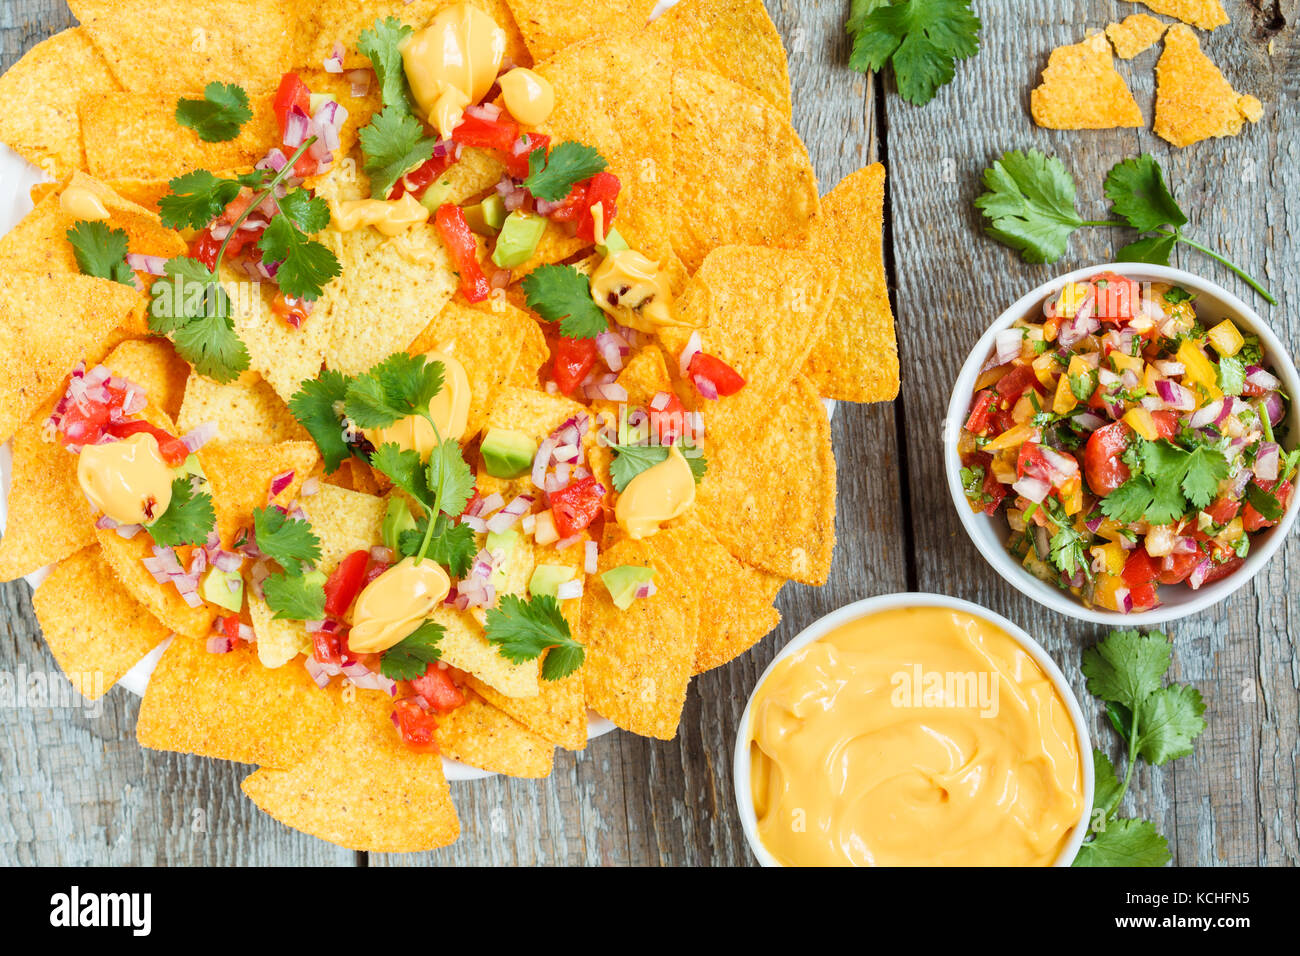 Yellow corn chips nachos with cheese sauce and salsa sauce. Mexican food snack concept. Stock Photo